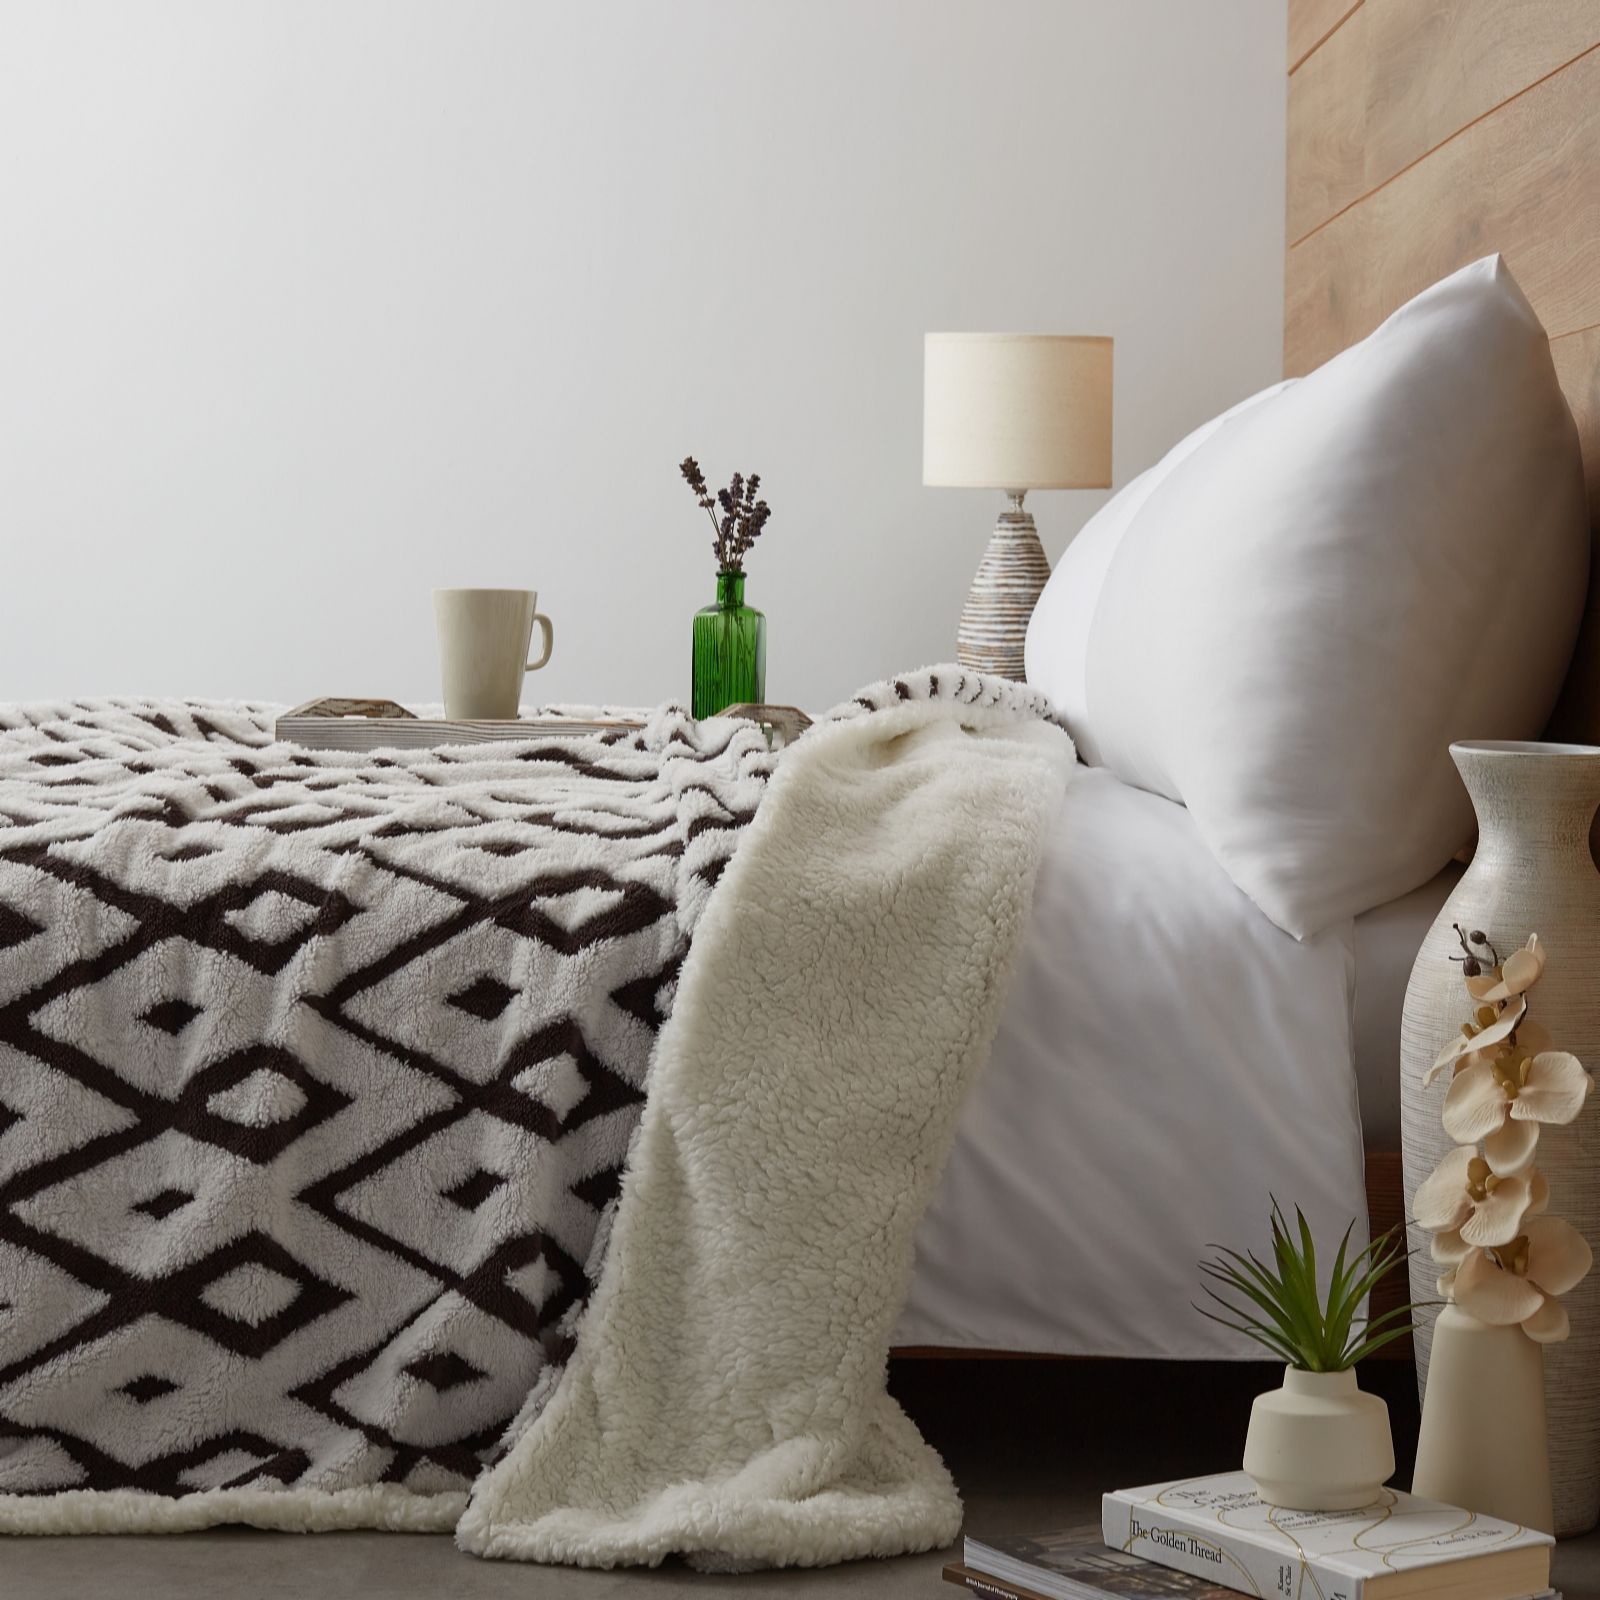 Wrap in Cream *NEW* Throw Cozee Home Cozee Home 3-in-1 Cushion 